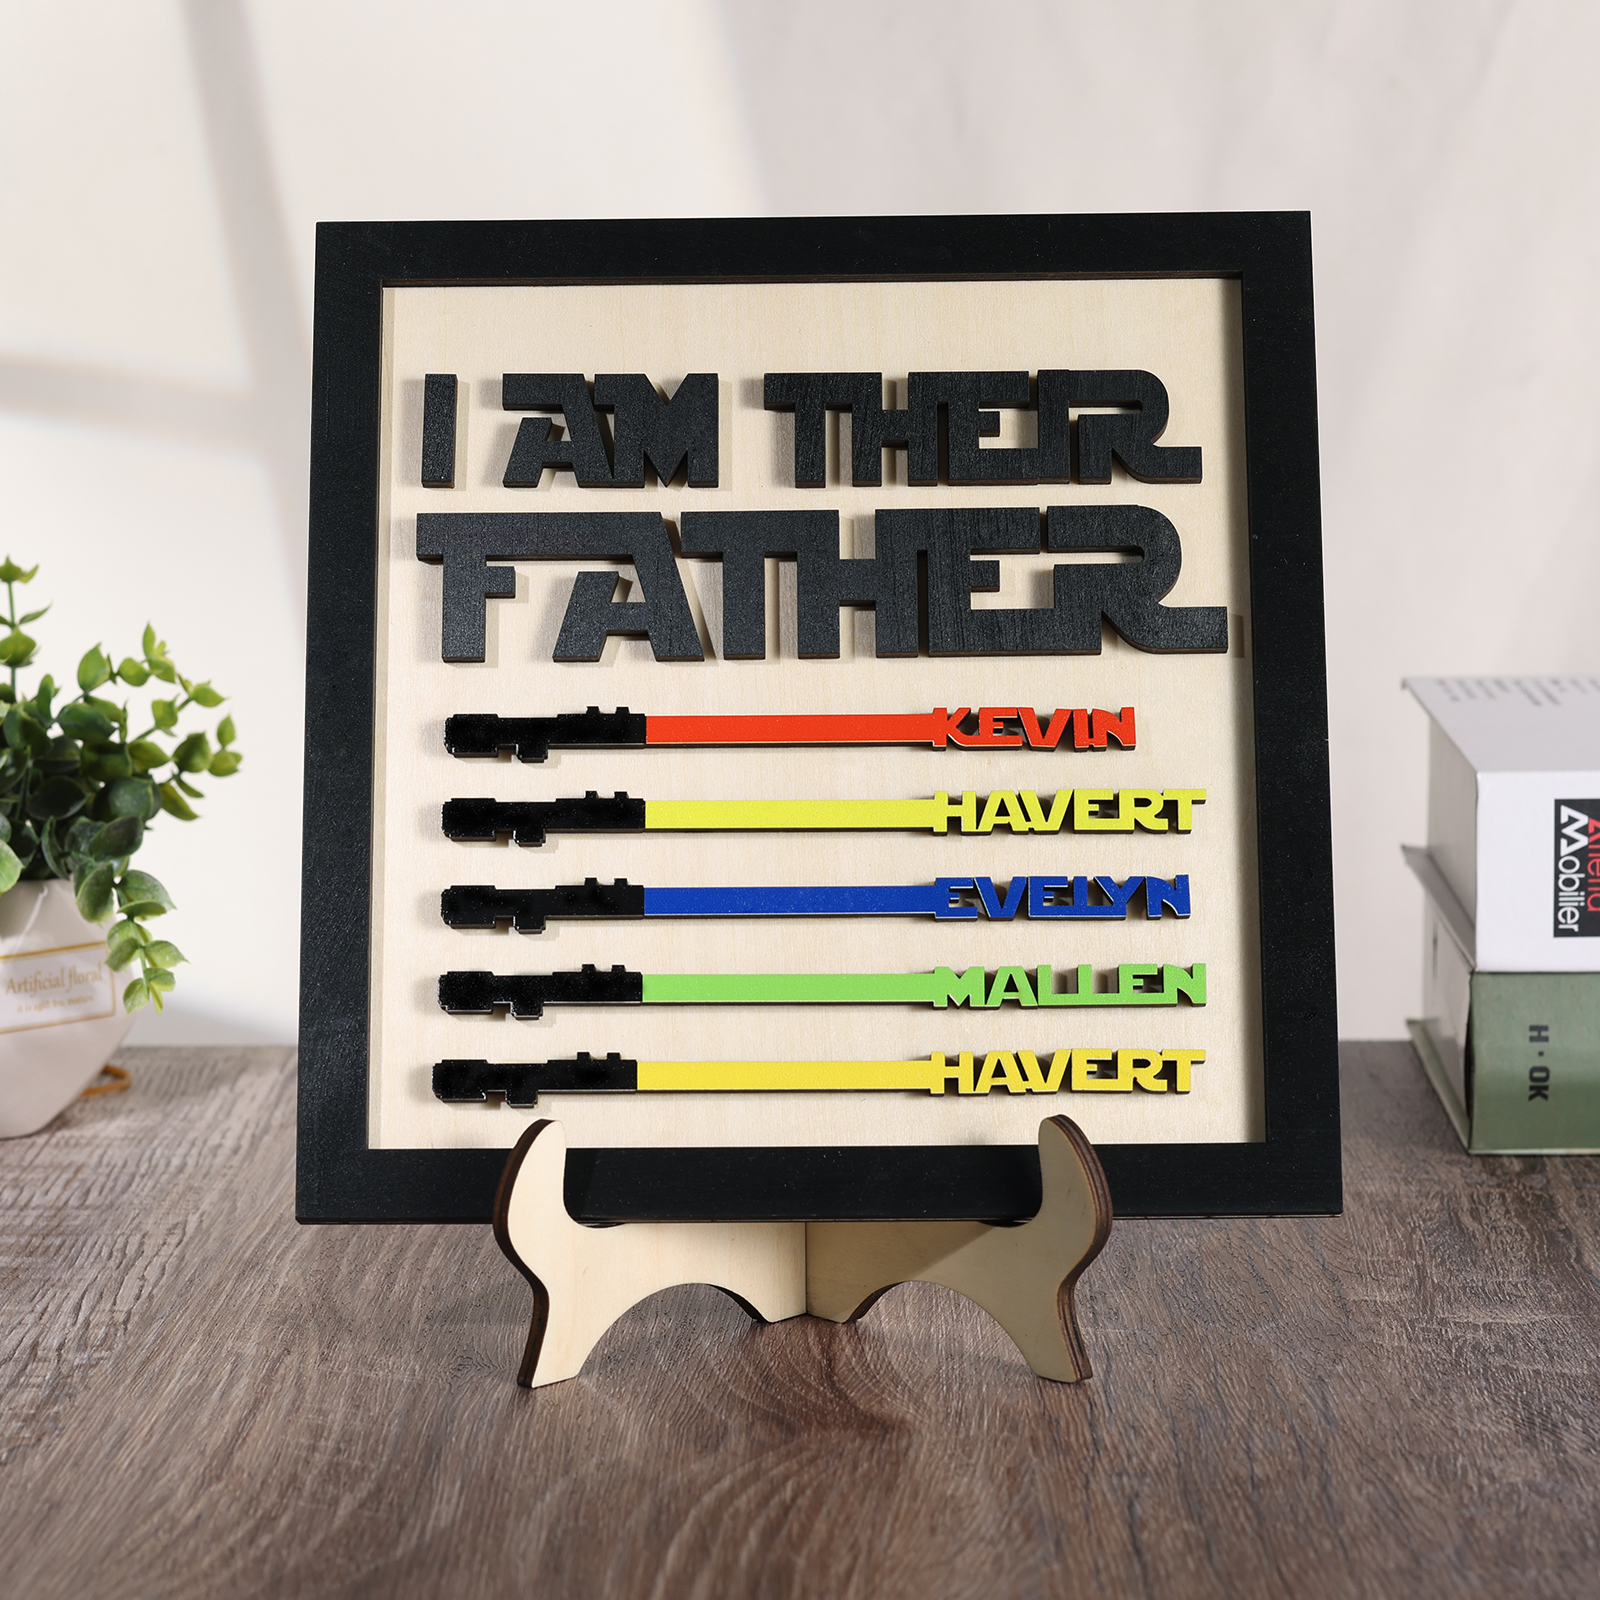 Personalized Star Wars Sign Father's Day Gifts - I AM THEIR FATHER - Wood Sign with 5 Names